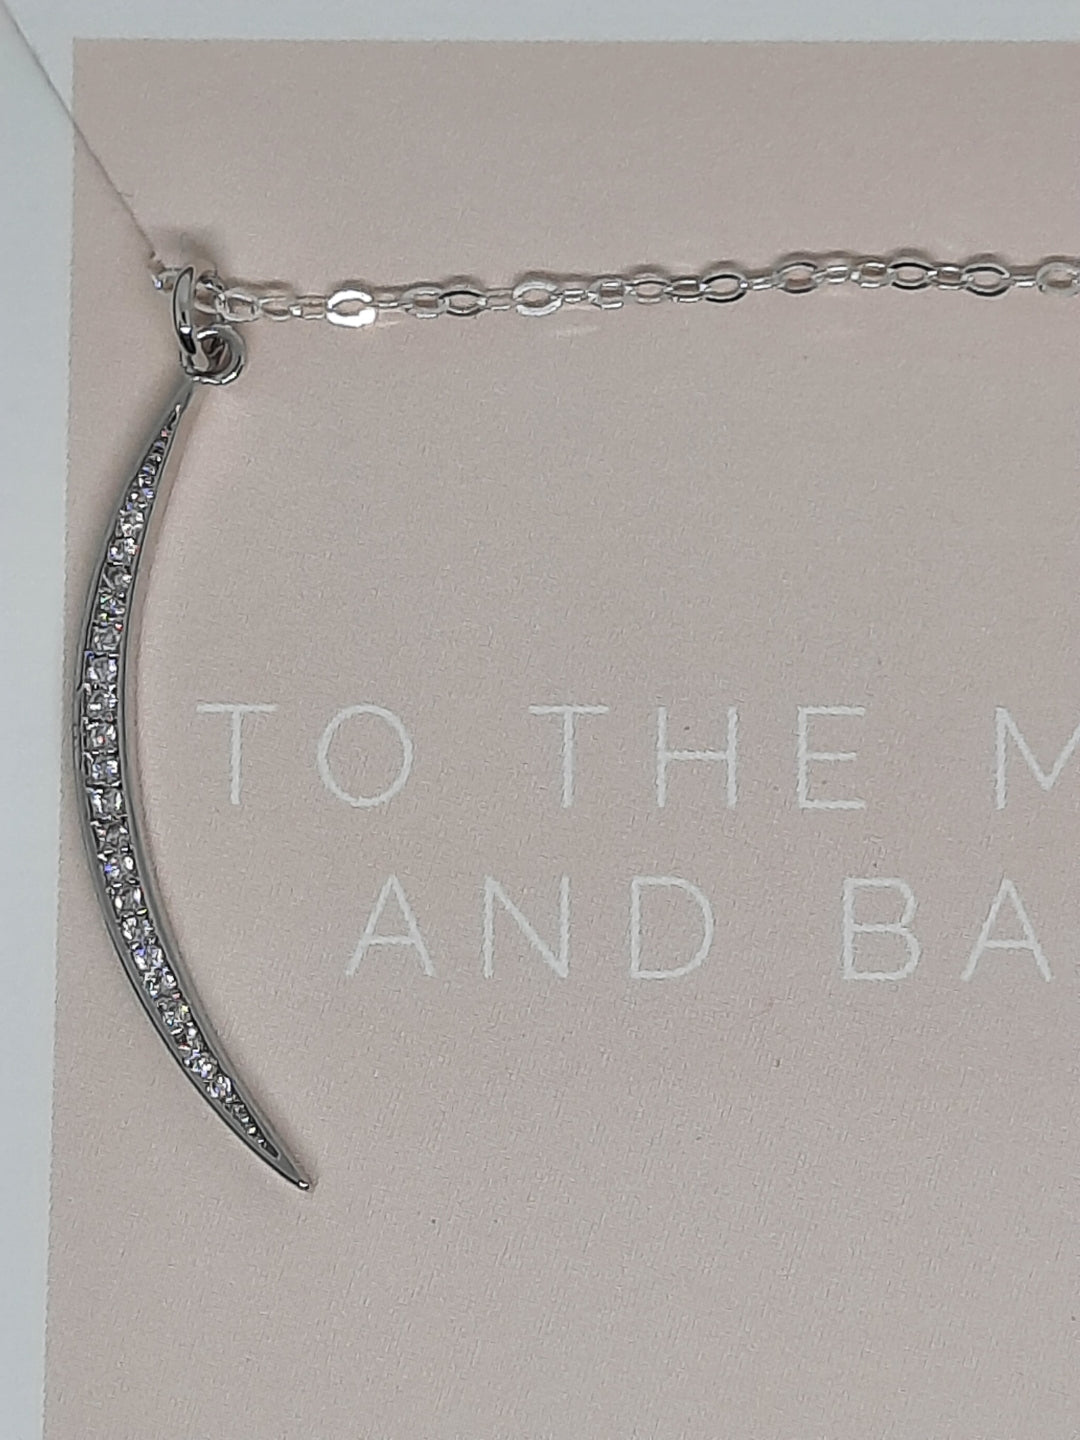 To the Moon and Back Necklace